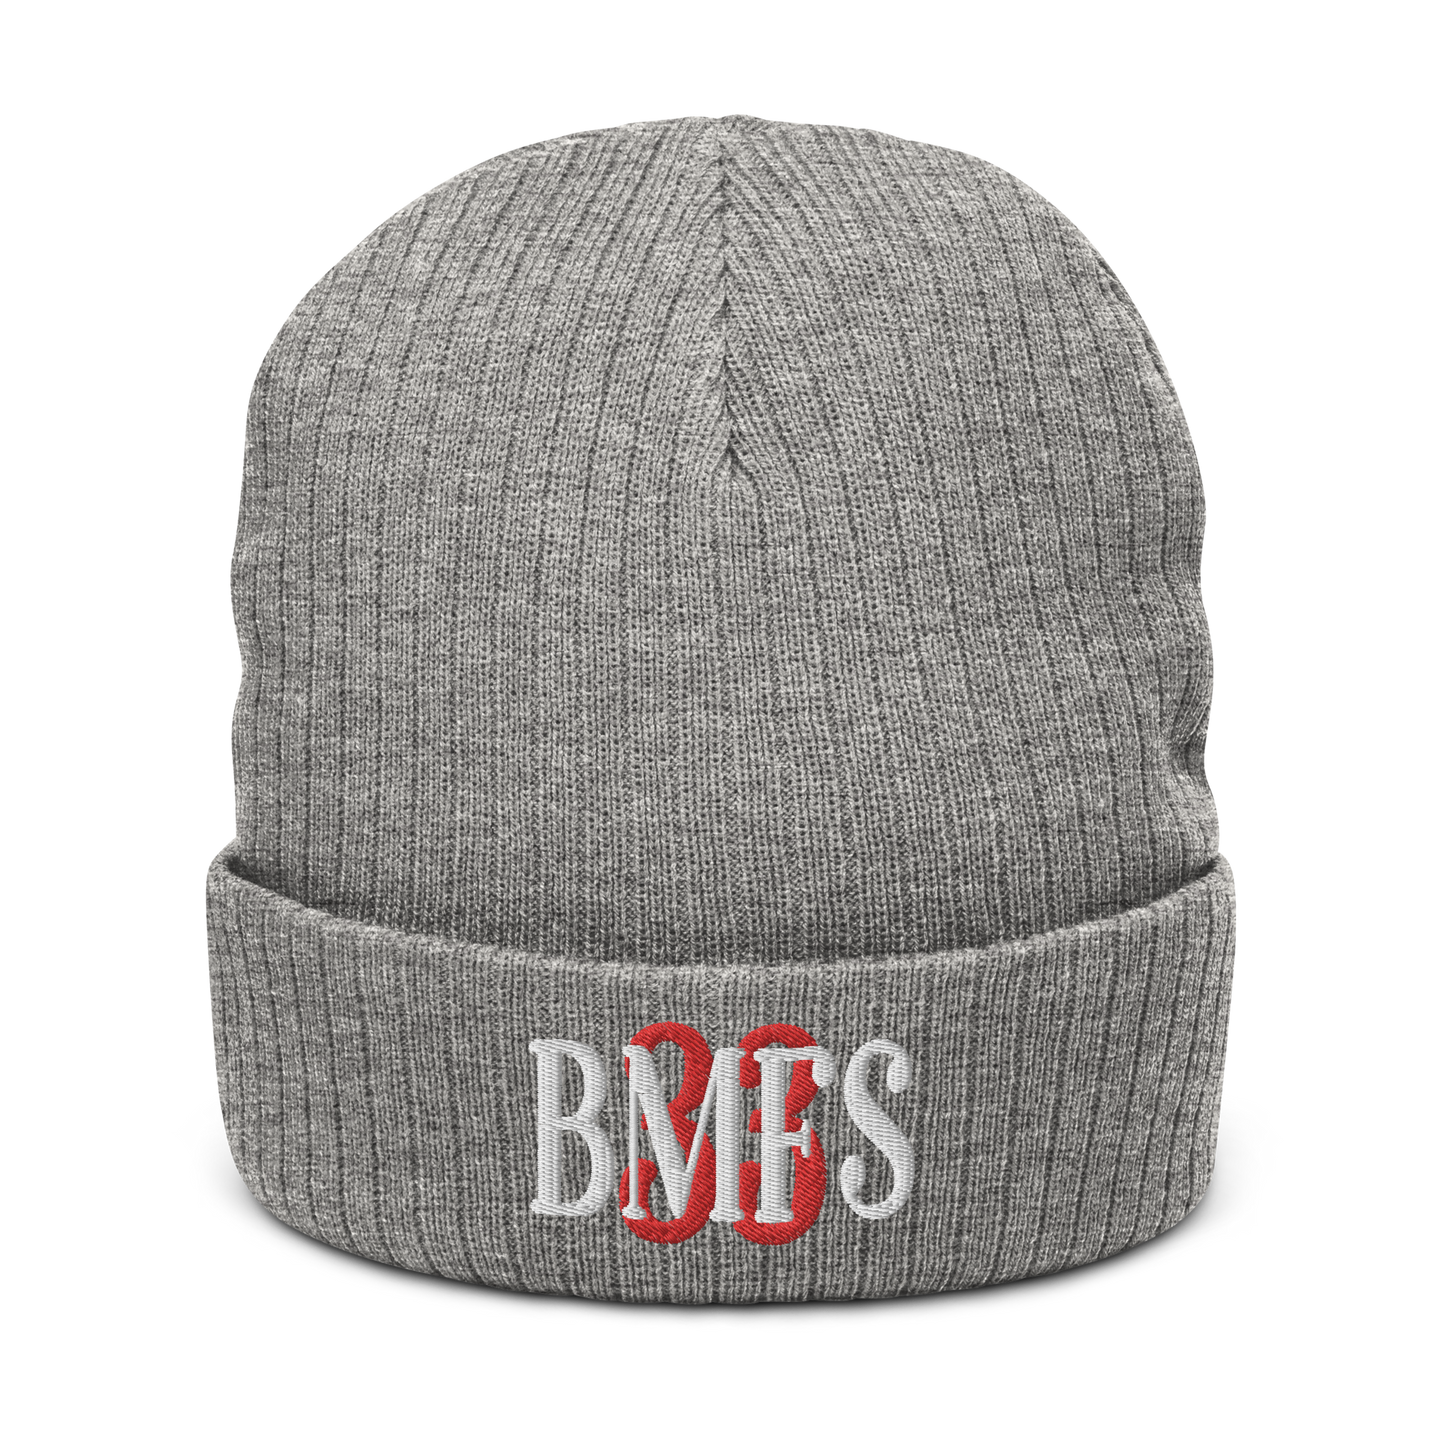 BMFS 33 Cuffed Beanie | Flat Embroidery | Ribbed | Inspired Billy Art